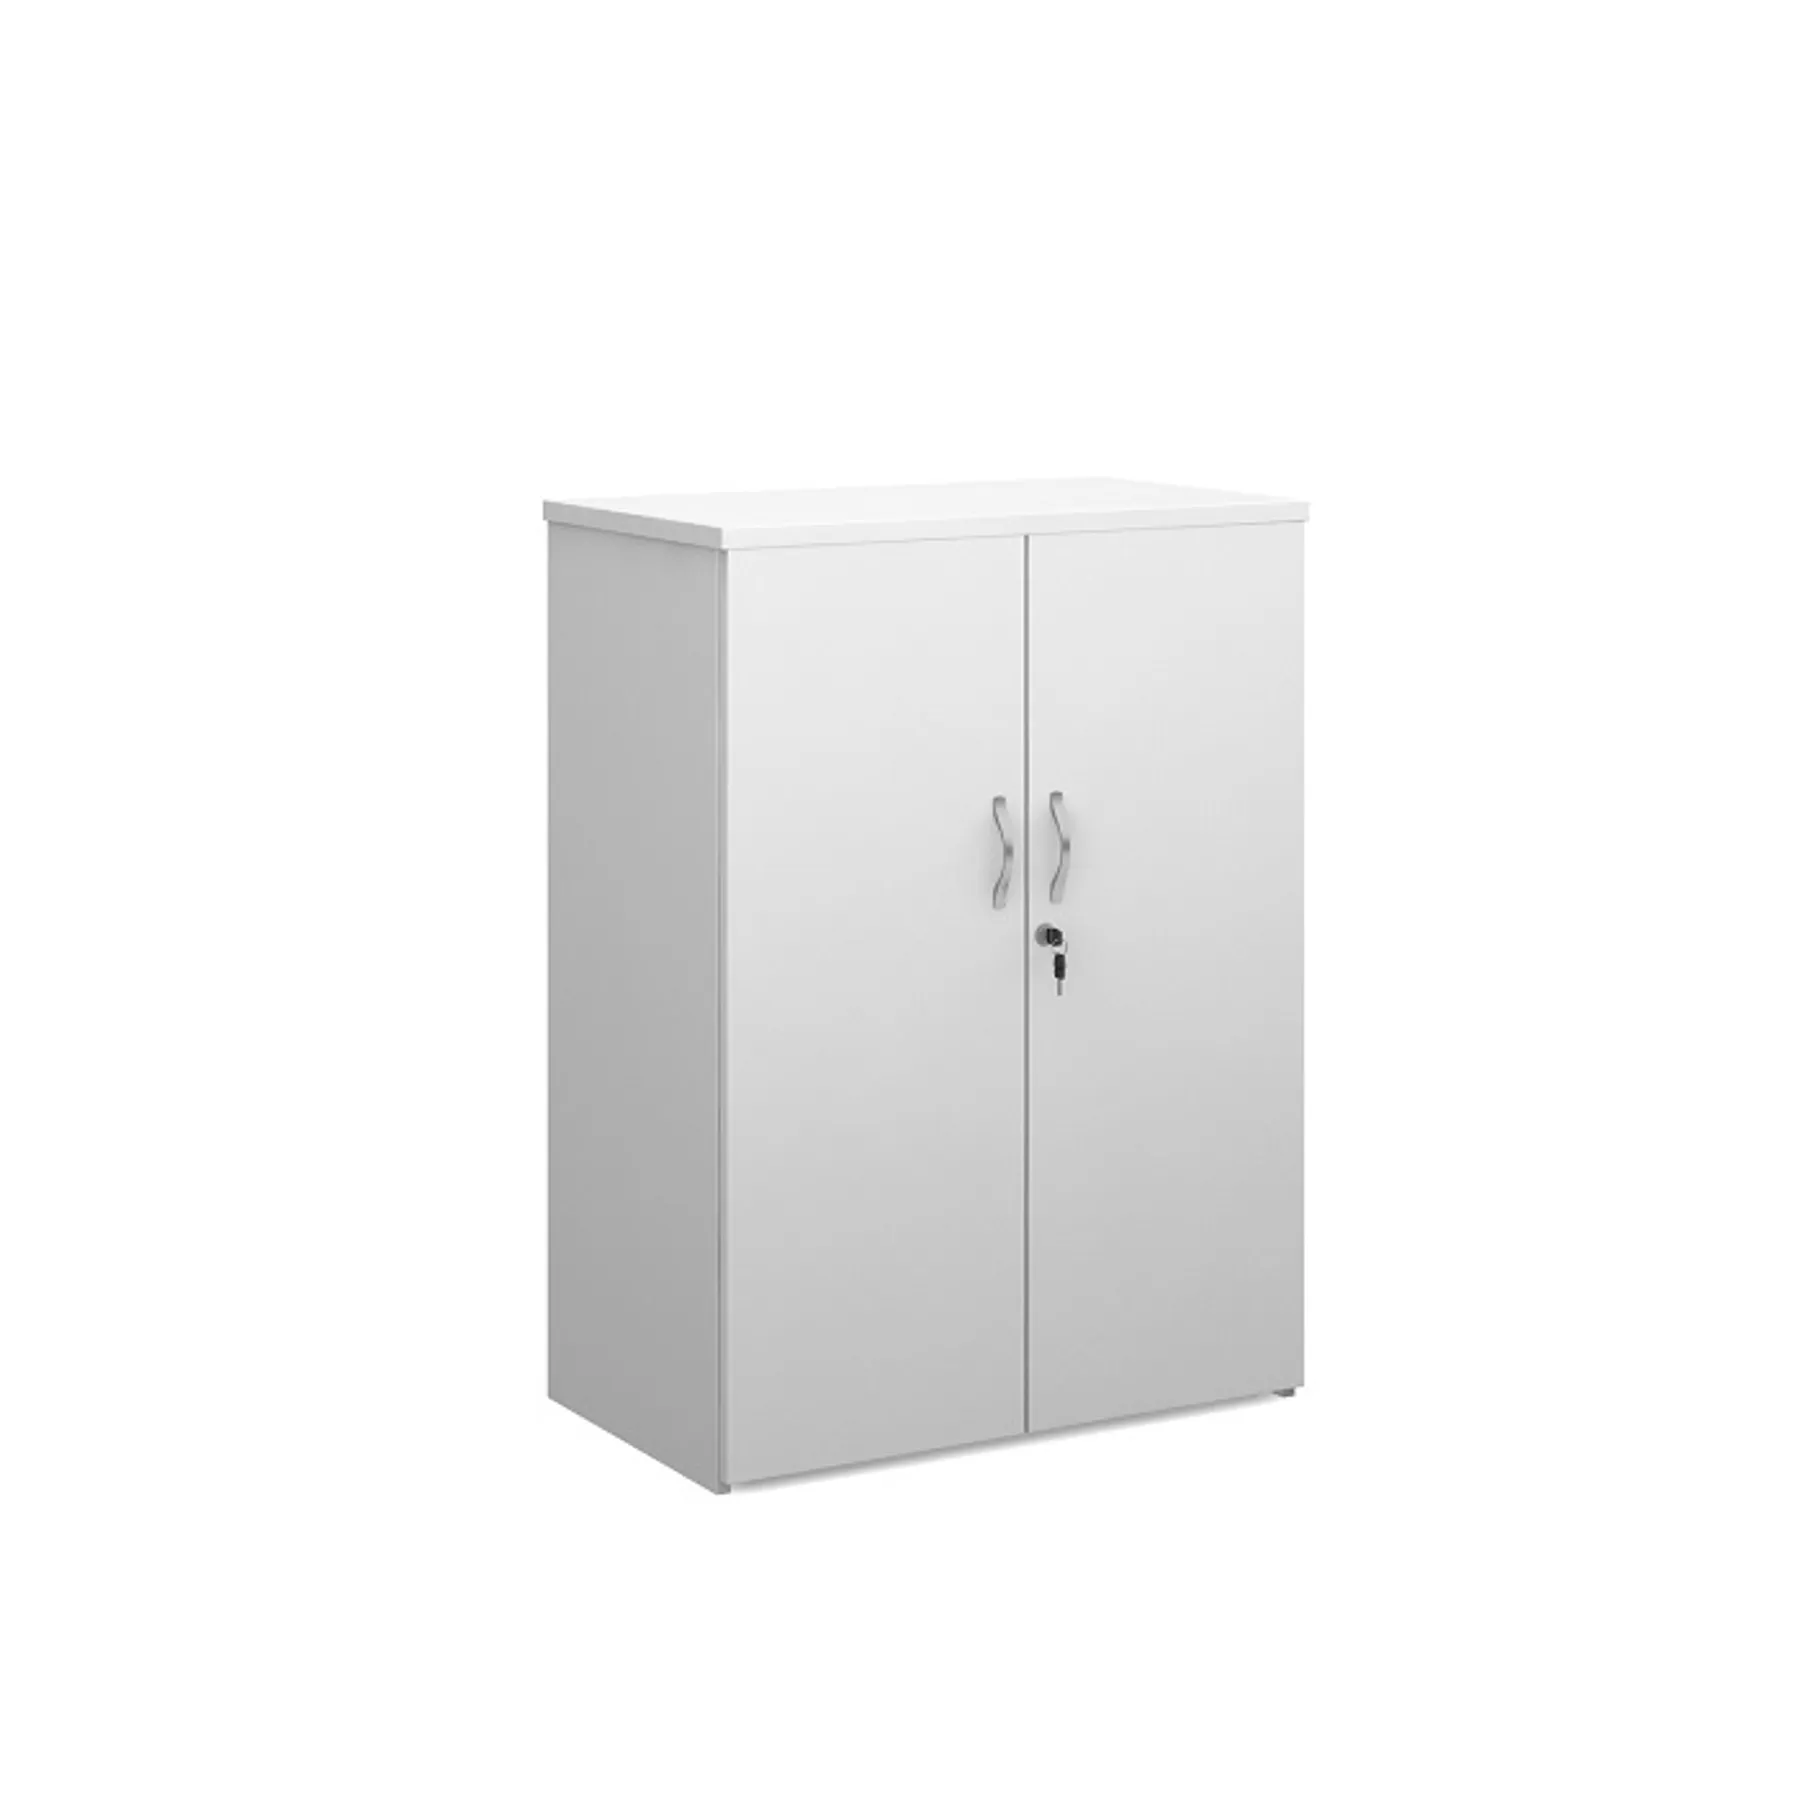 Lof direct dams cupboard 1090mm high WHITE R1090 D WH